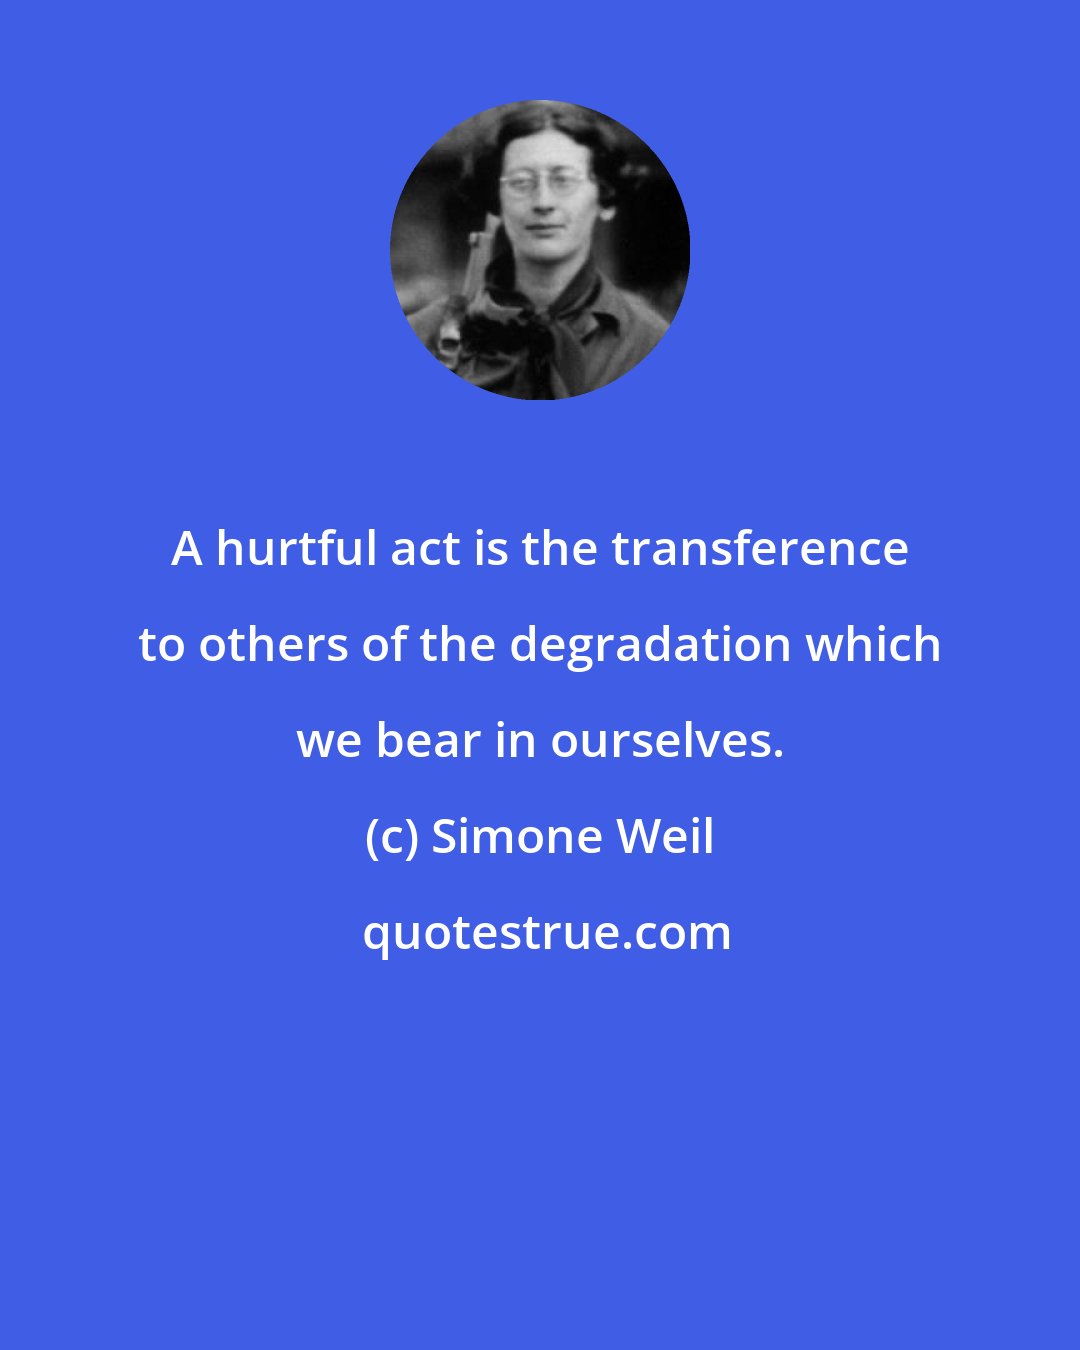 Simone Weil: A hurtful act is the transference to others of the degradation which we bear in ourselves.